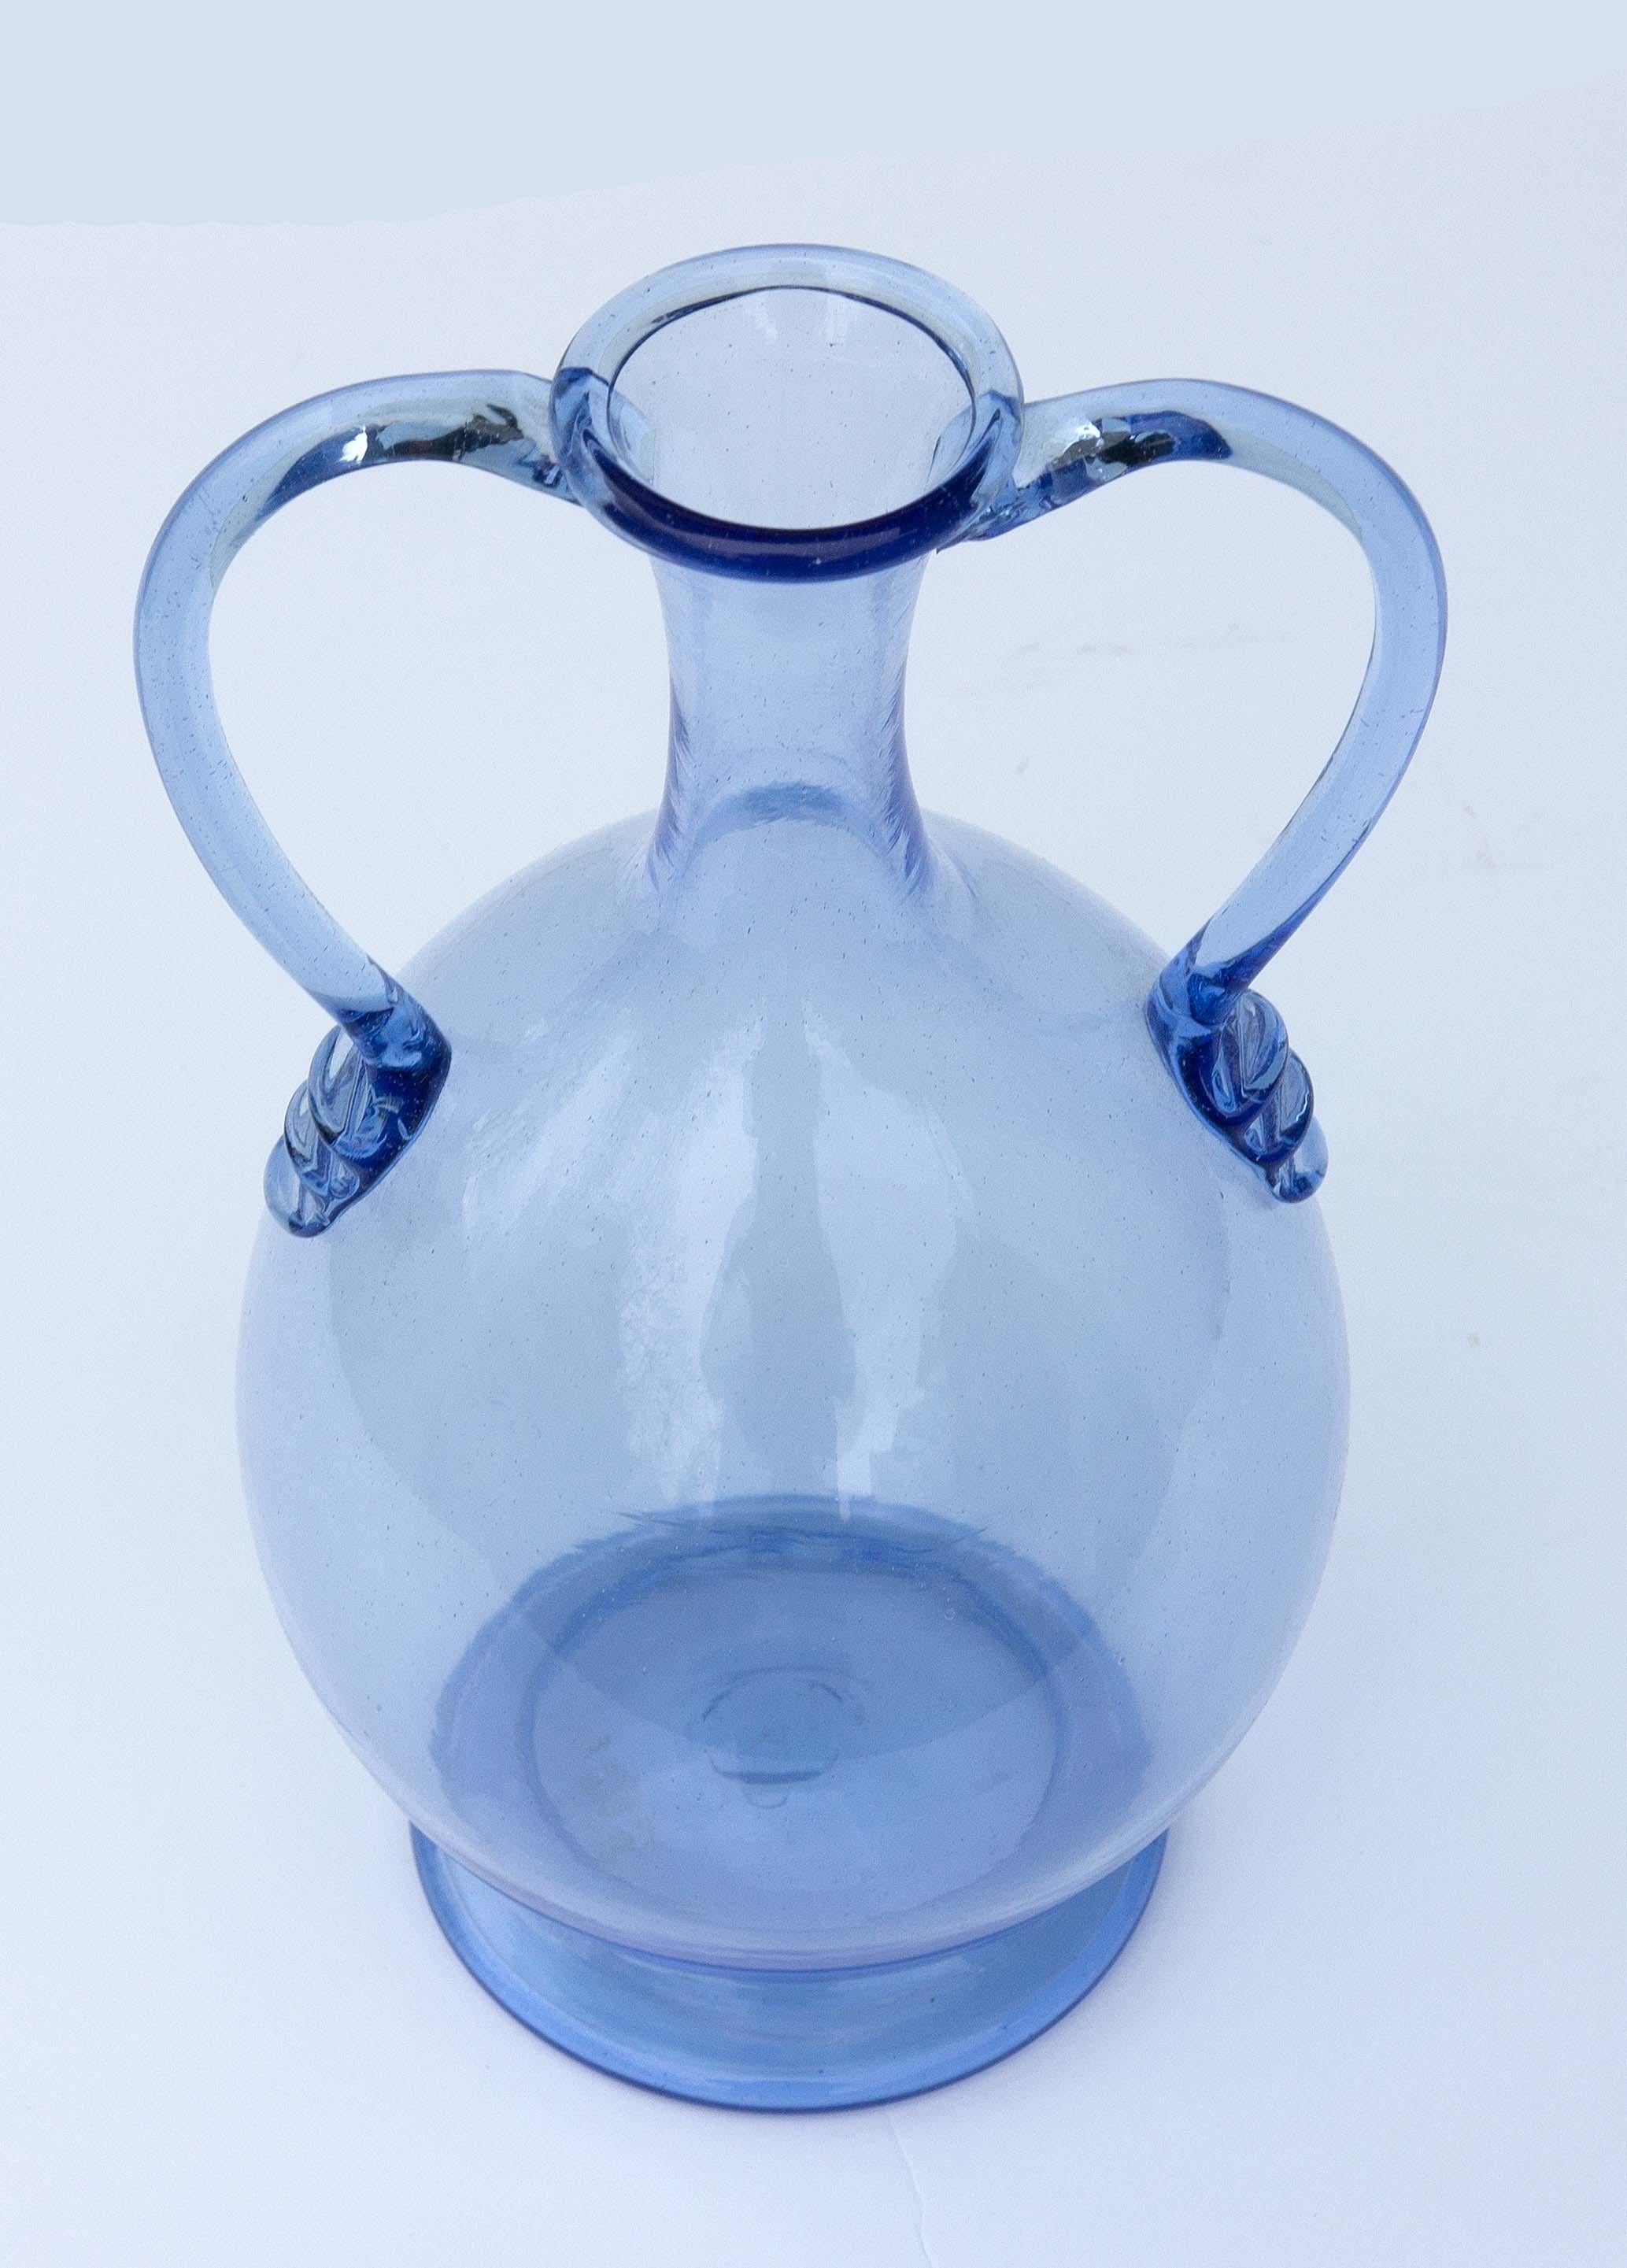 Murano blown glass vase with applied handles. Light blue. Attributed to Salviati.